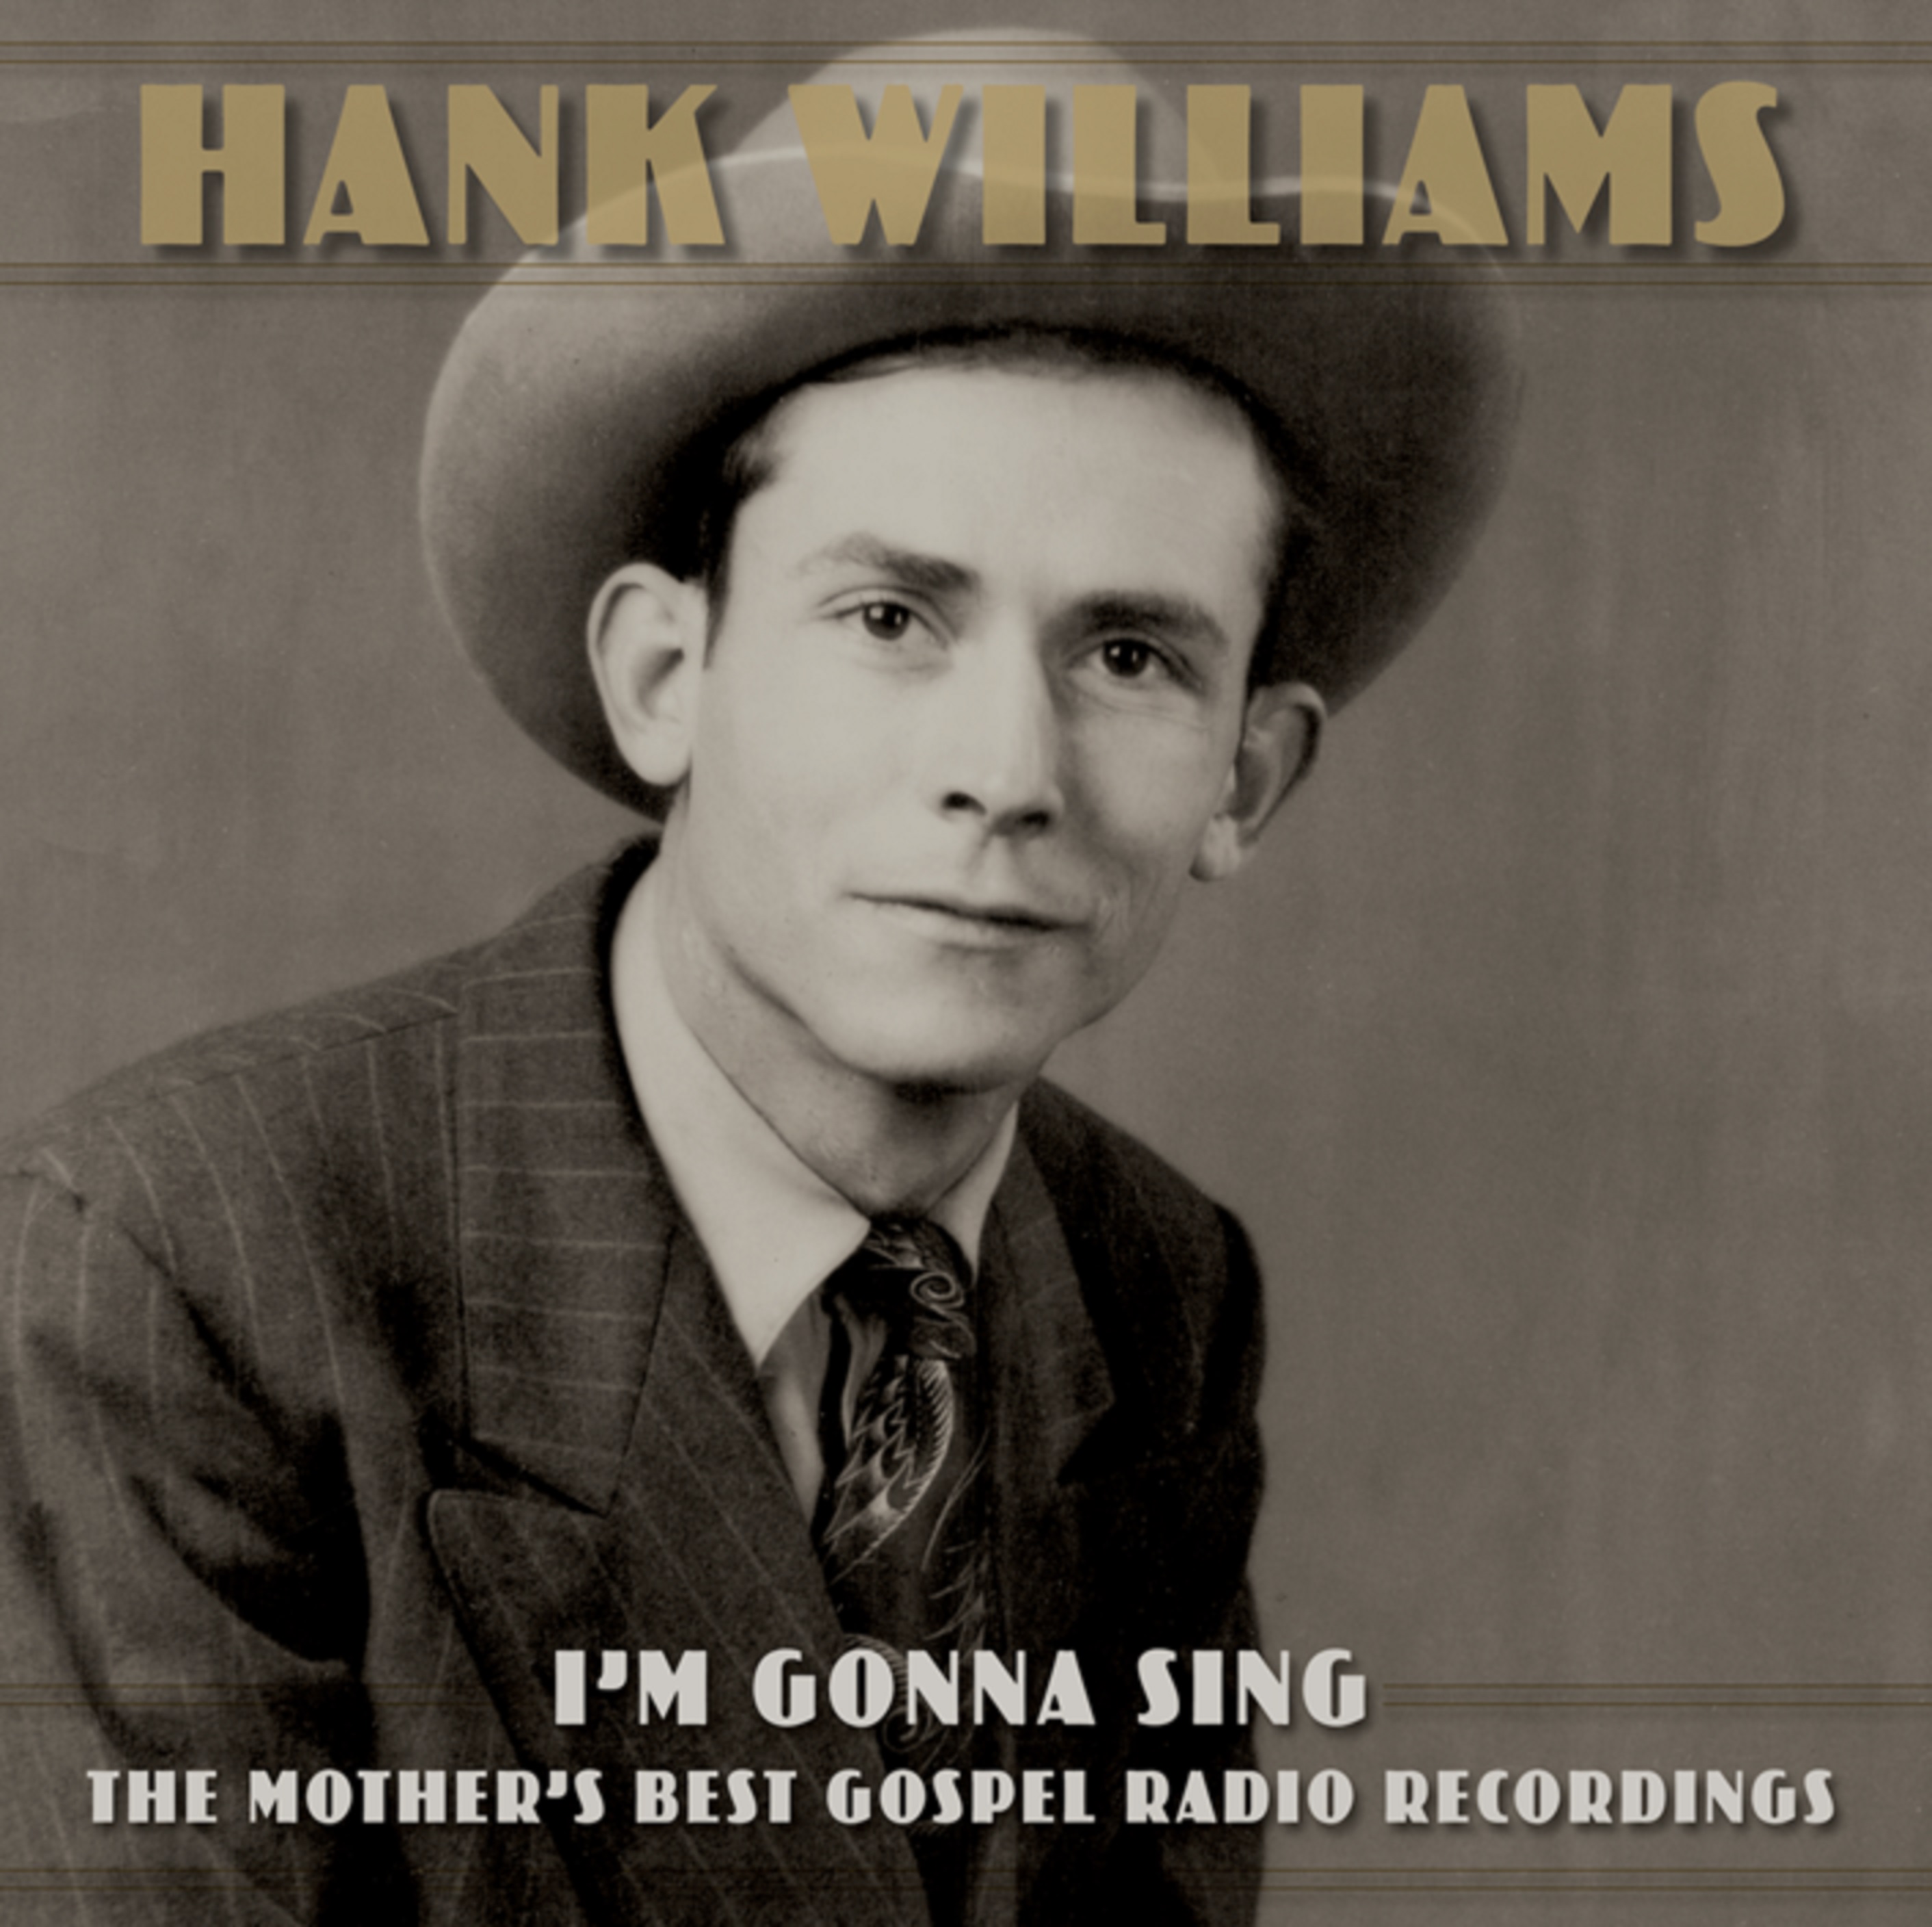 New Hank Williams compilation 'I'm Gonna Sing' spotlights country music legends from historic Mother's Best radio shows, coming March 11 on BMG